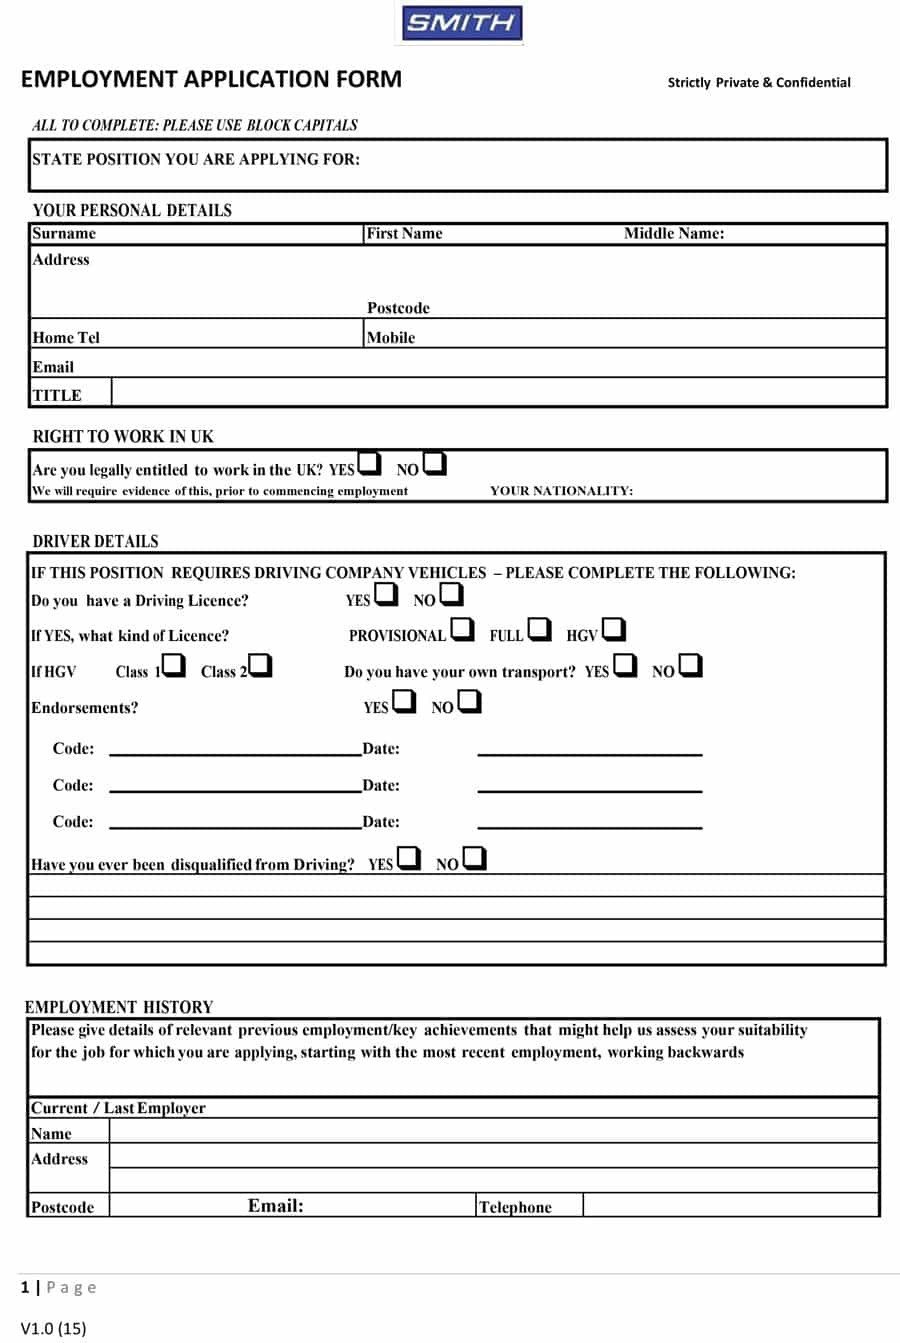 Free Employment Application Template Download 50 Free Employment Job Application form Templates